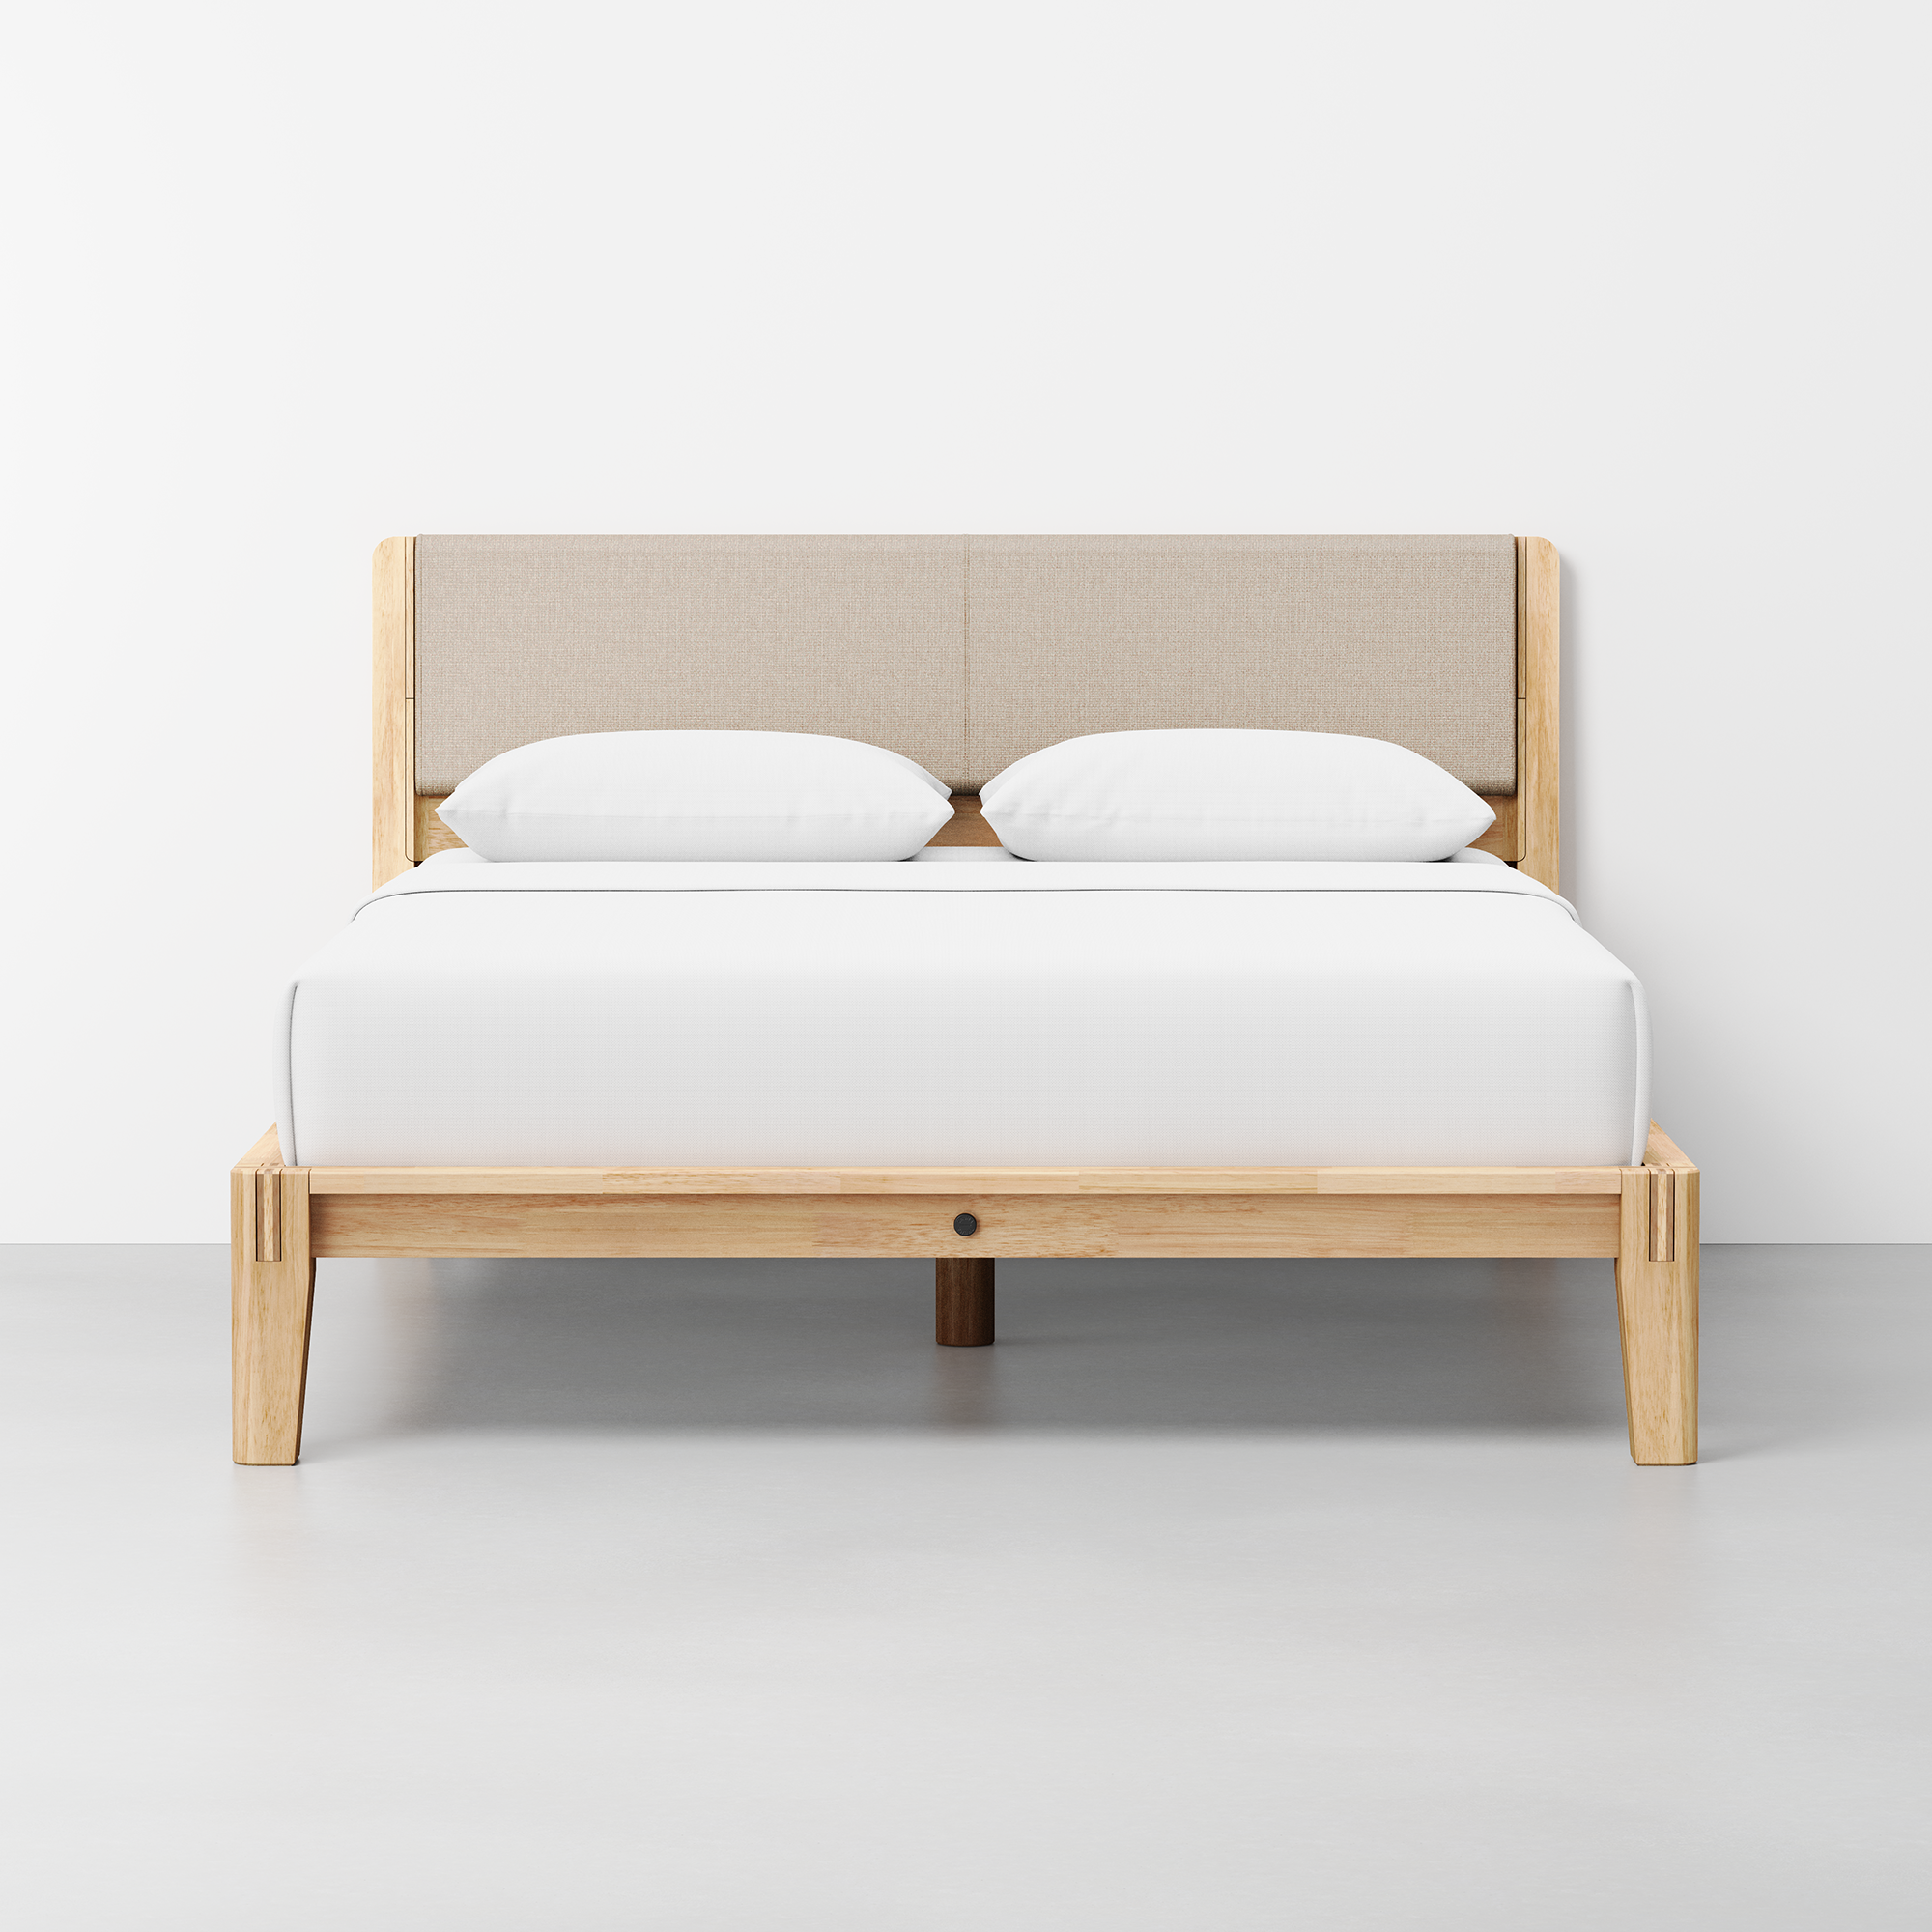 The Bed (Natural / HB Cushion Dune) - Render - Front